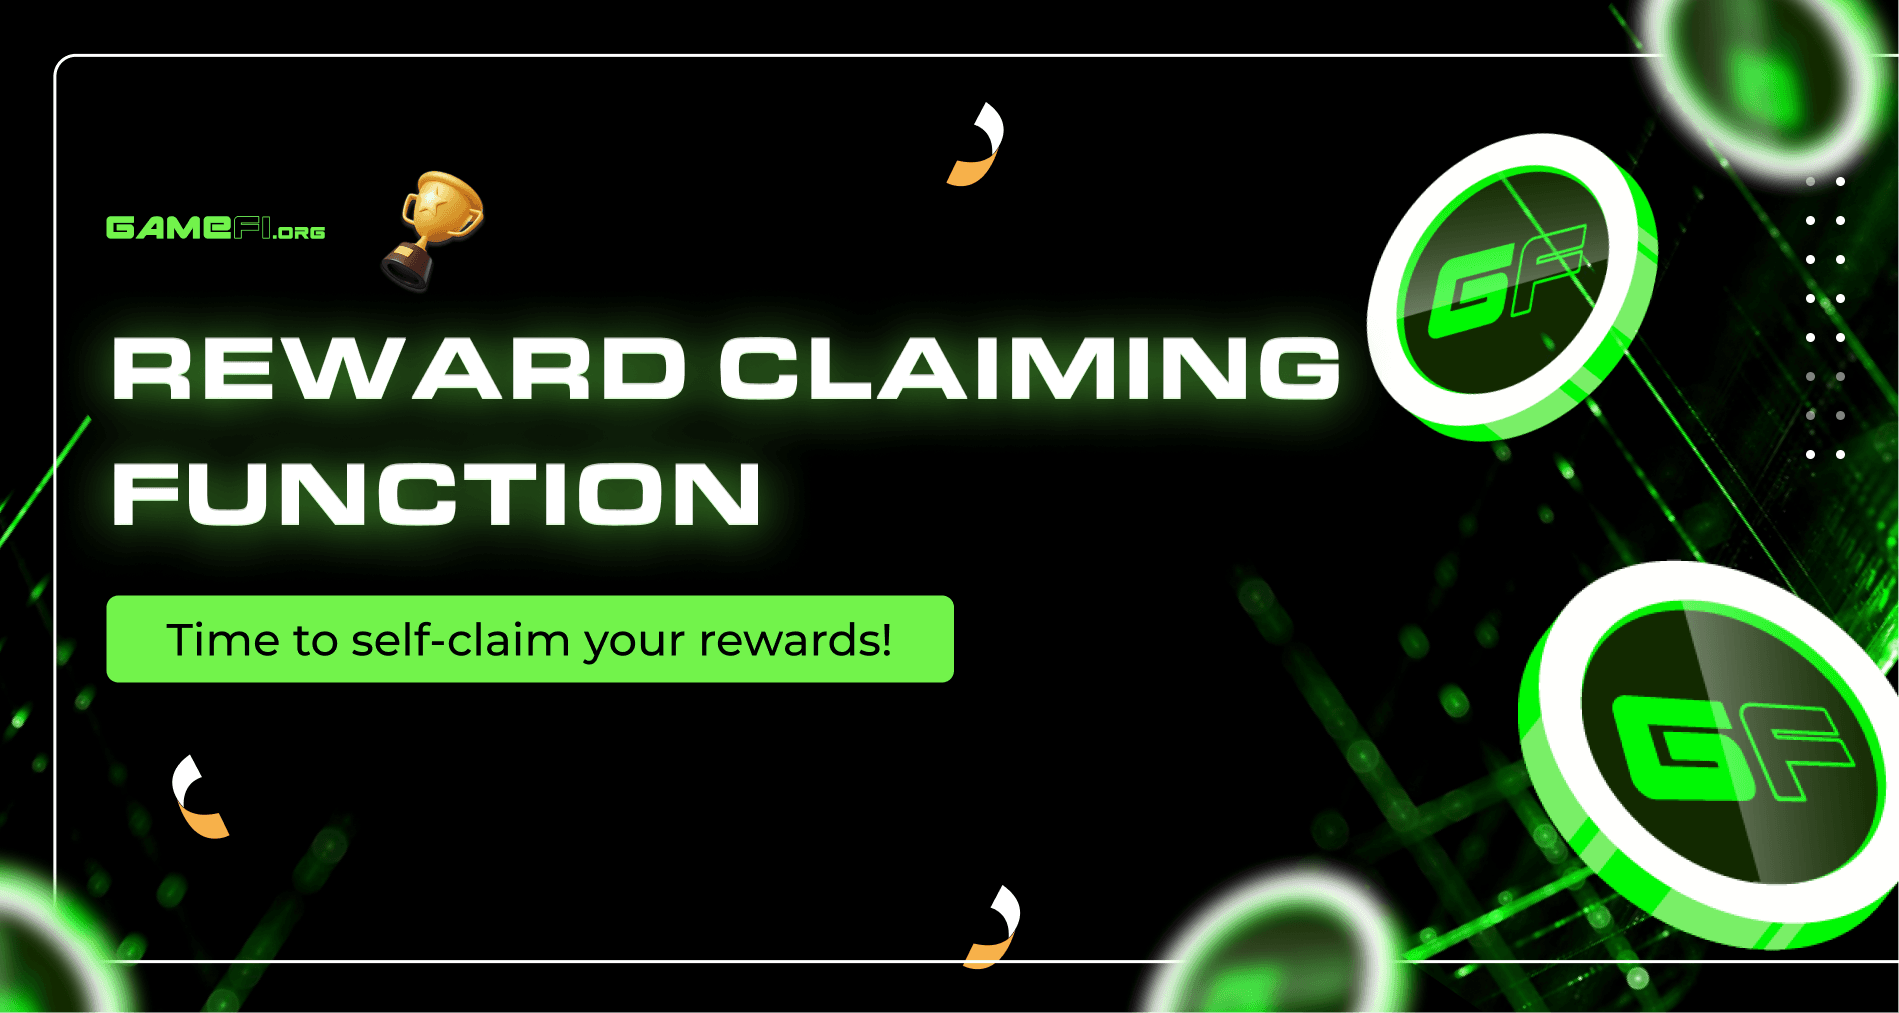 Feature Release: Reward Claiming Function Live on GameFi.org! 🟢